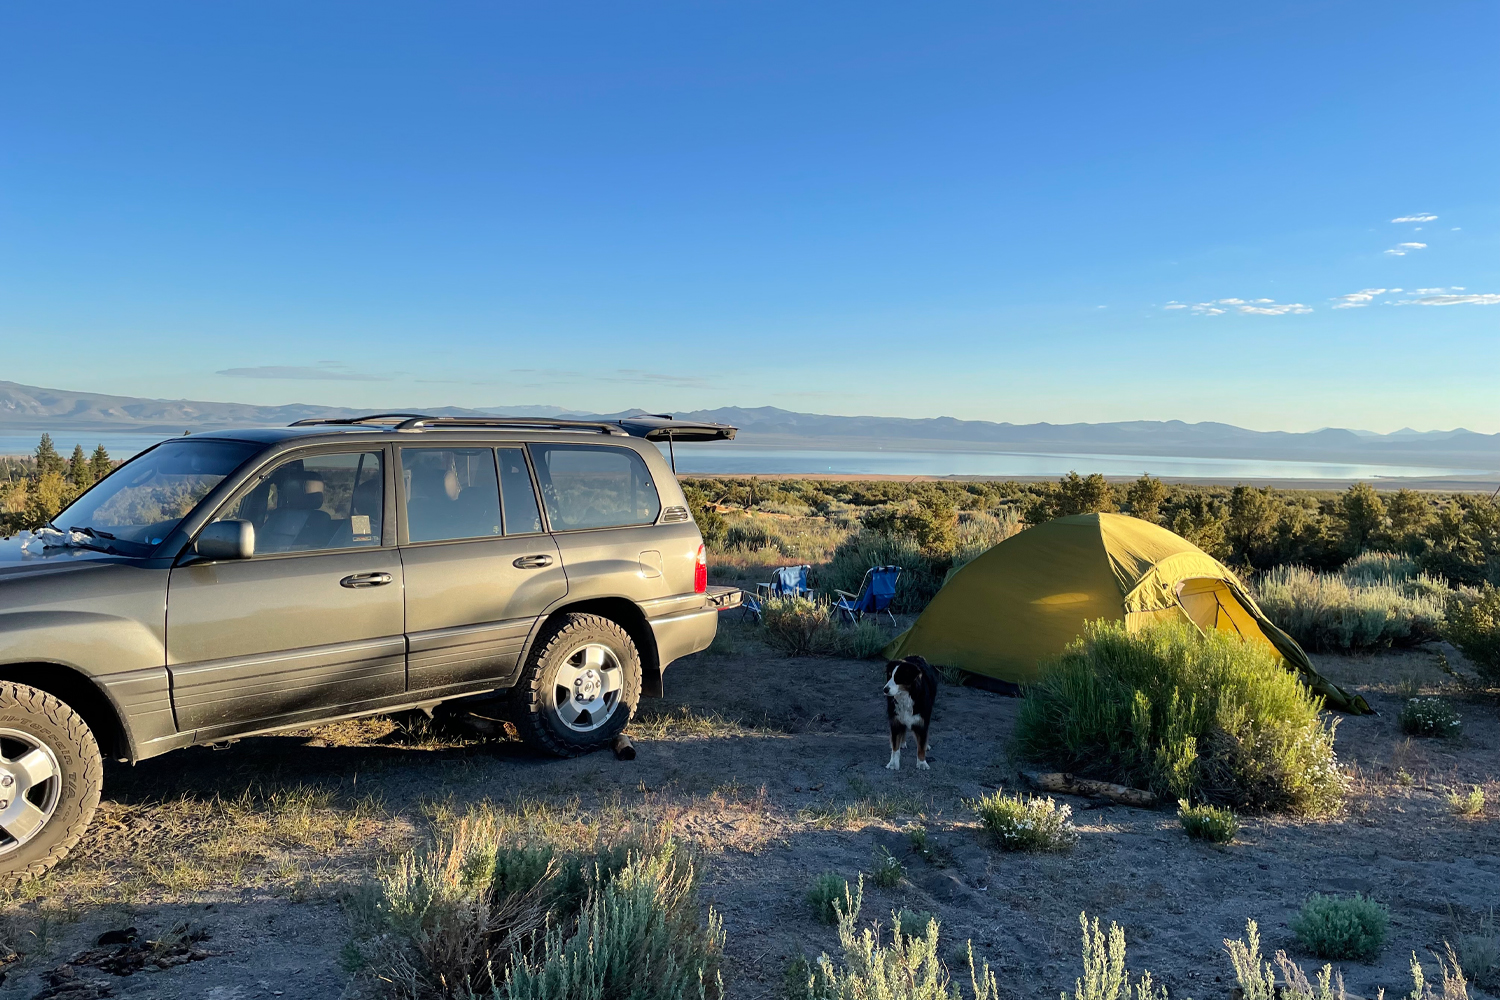 My preferred camping setup with the LX 470